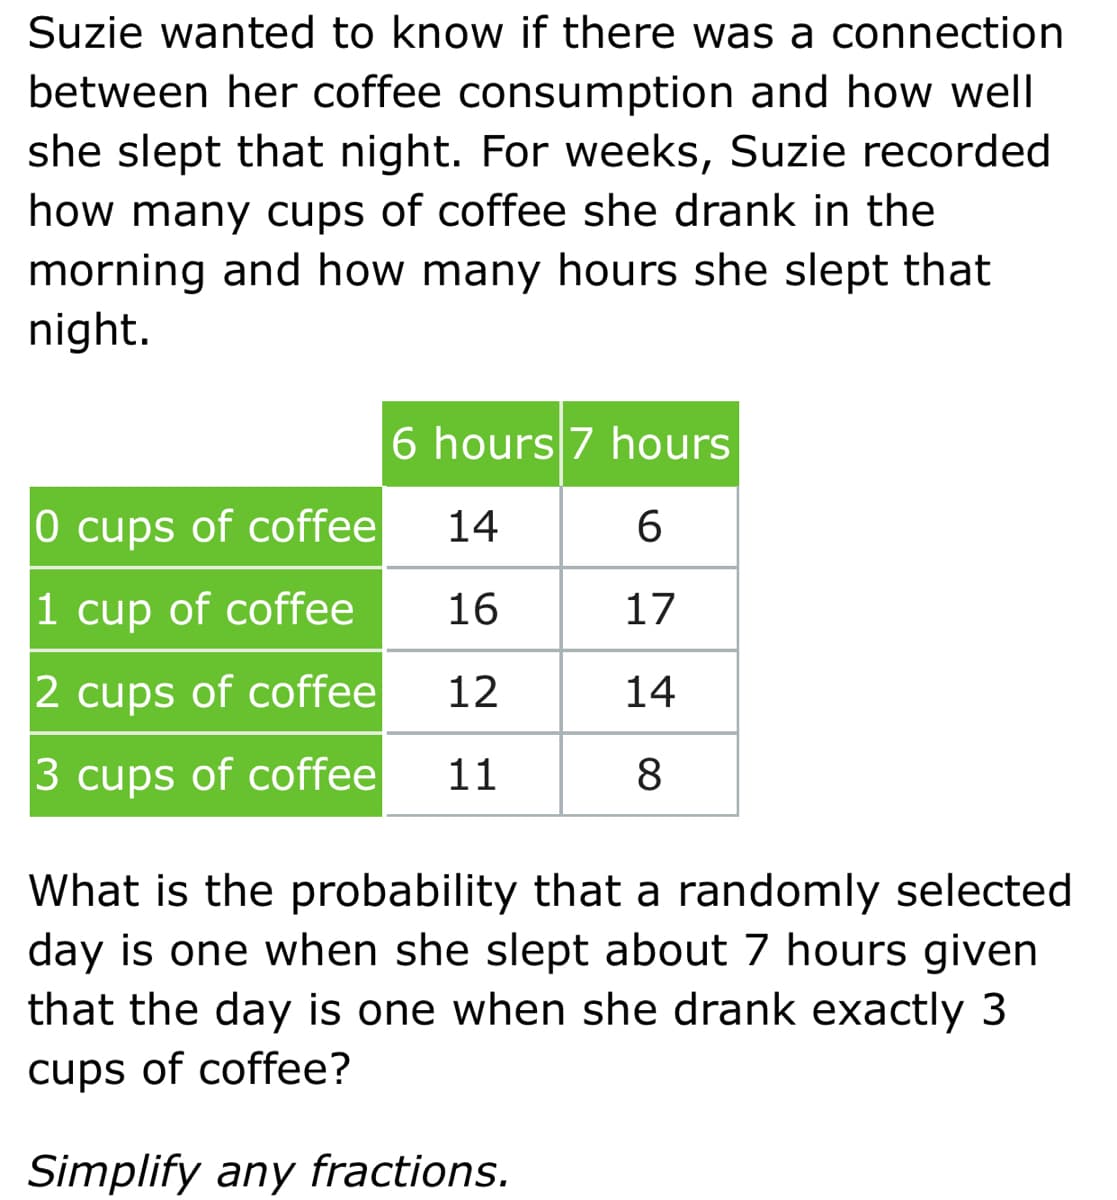 Suzie wanted to know if there was a connection
between her coffee consumption and how well
she slept that night. For weeks, Suzie recorded
how many cups of coffee she drank in the
morning and how many hours she slept that
night.
6 hours 7 hours
0 cups of coffee
14
1 cup of coffee
16
17
2 cups of coffee
12
14
3 cups of coffee
11
8
What is the probability that a randomly selected
day is one when she slept about 7 hours given
that the day is one when she drank exactly 3
cups of coffee?
Simplify any fractions.
